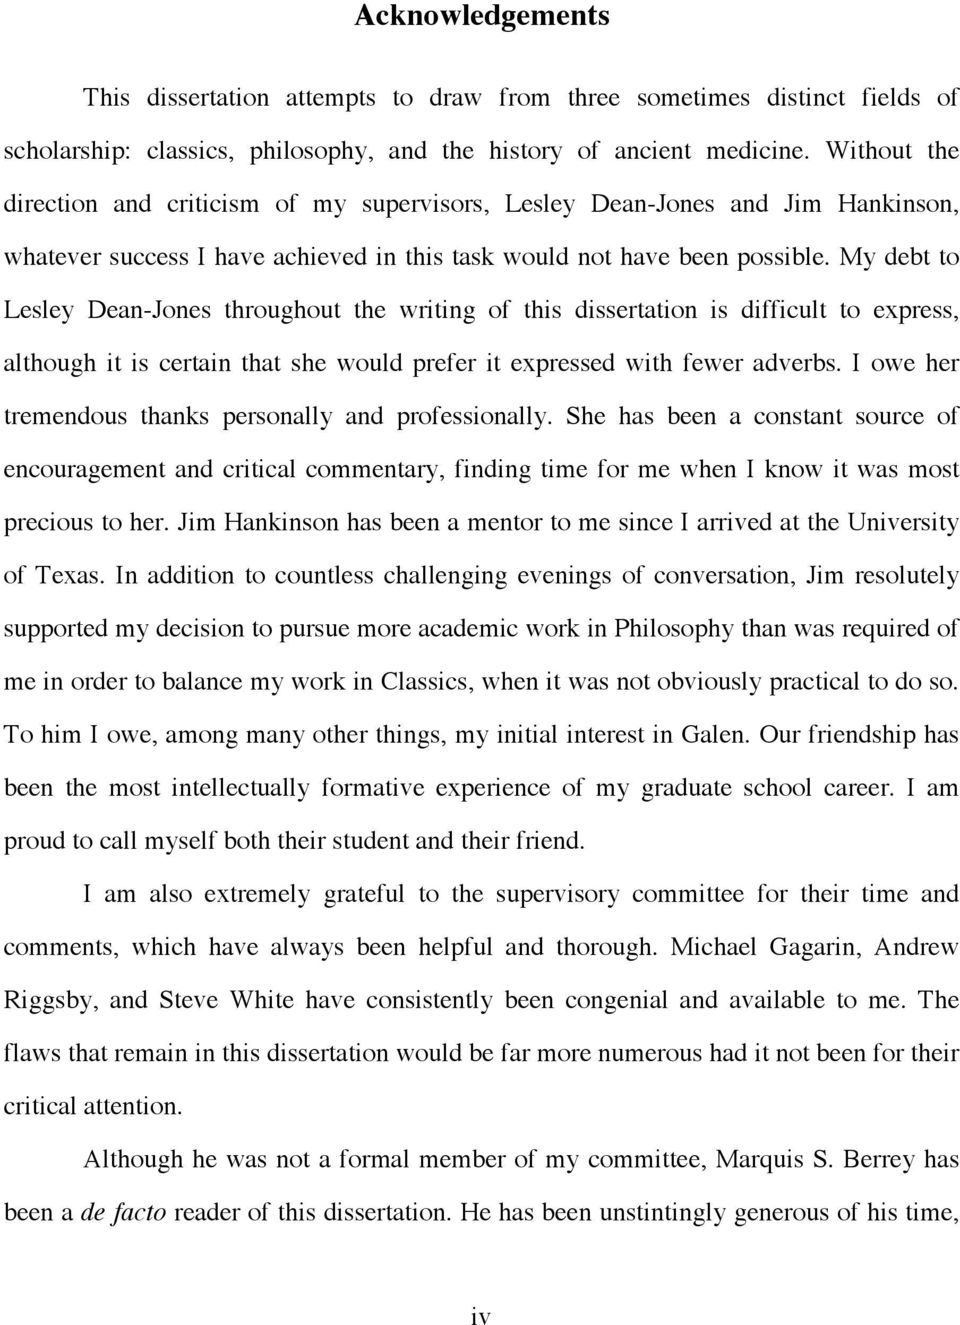 My debt to Lesley Dean-Jones throughout the writing of this dissertation is difficult to express, although it is certain that she would prefer it expressed with fewer adverbs.